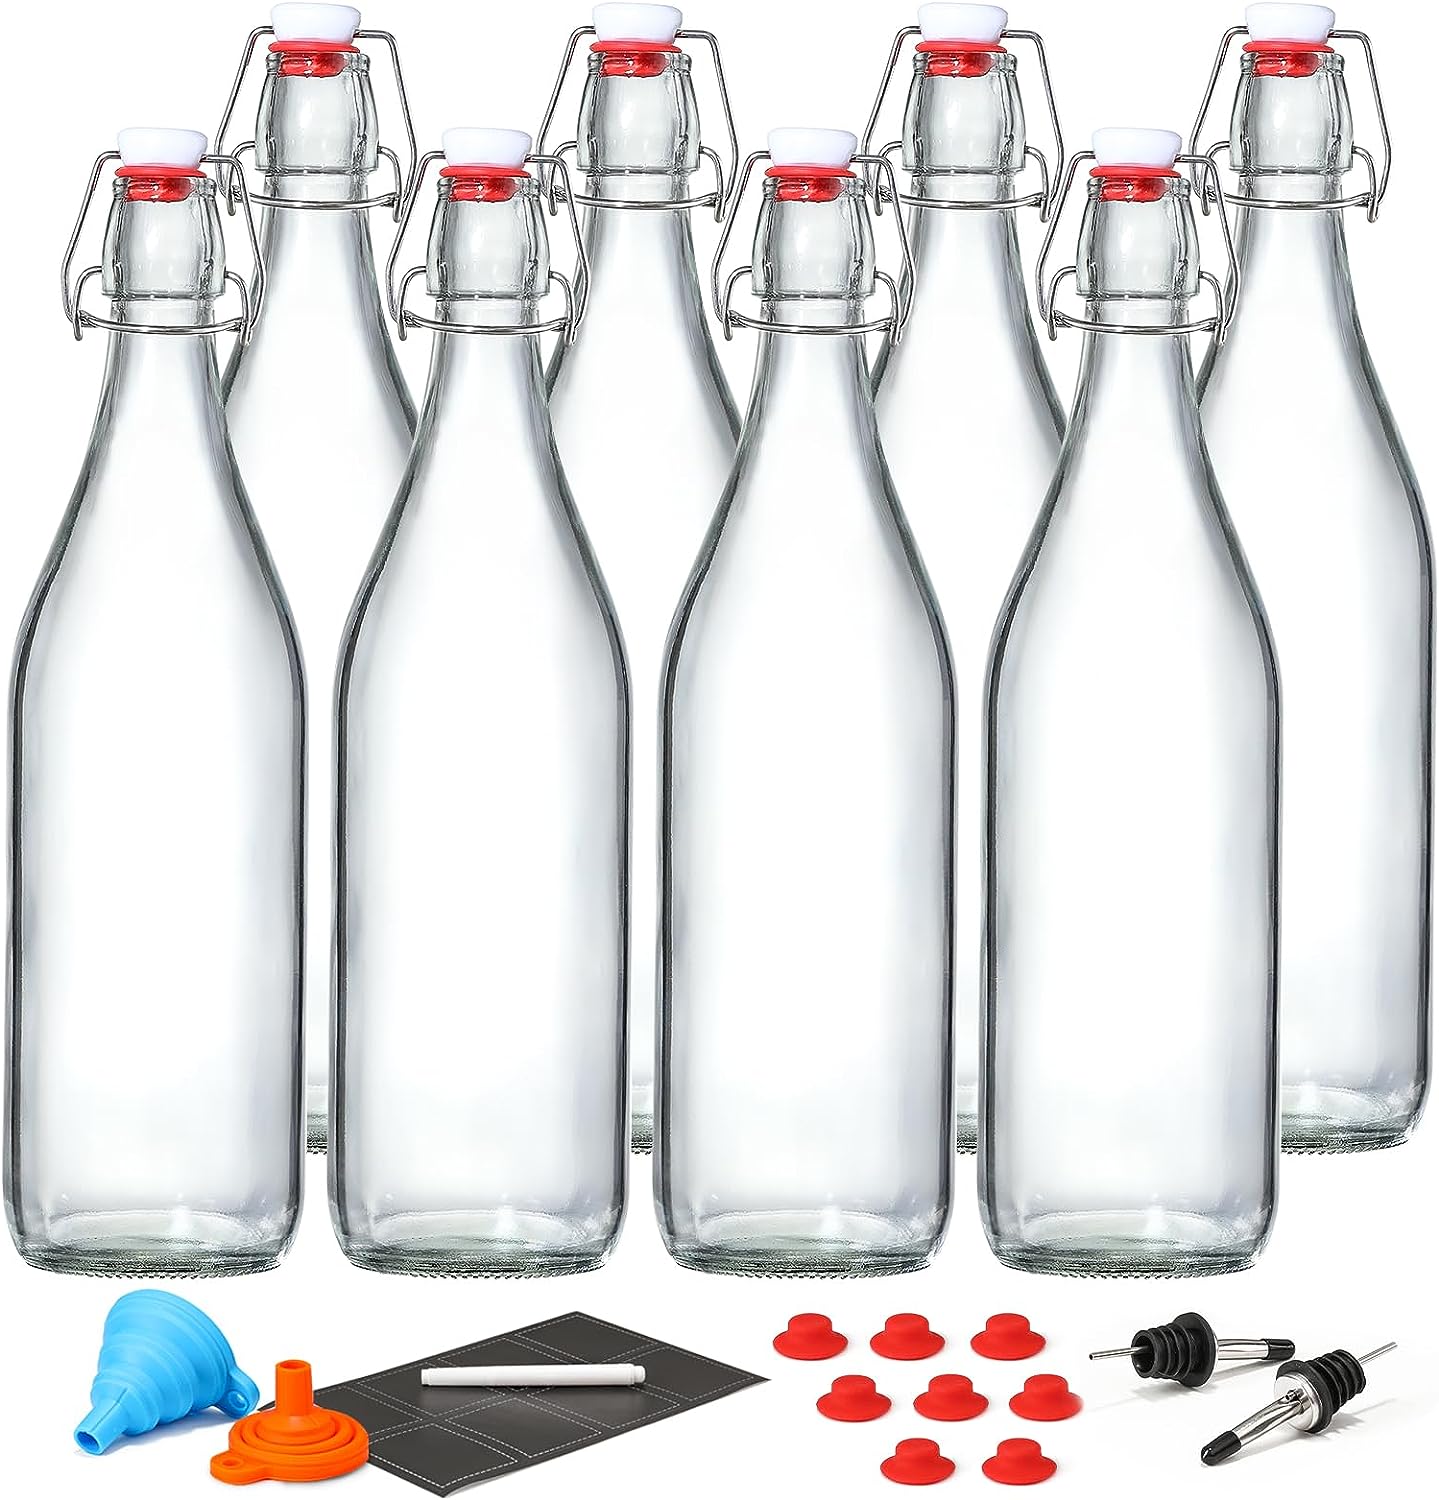  DilaBee Glass Juice Bottles with Lids [12 Pack] Bulk